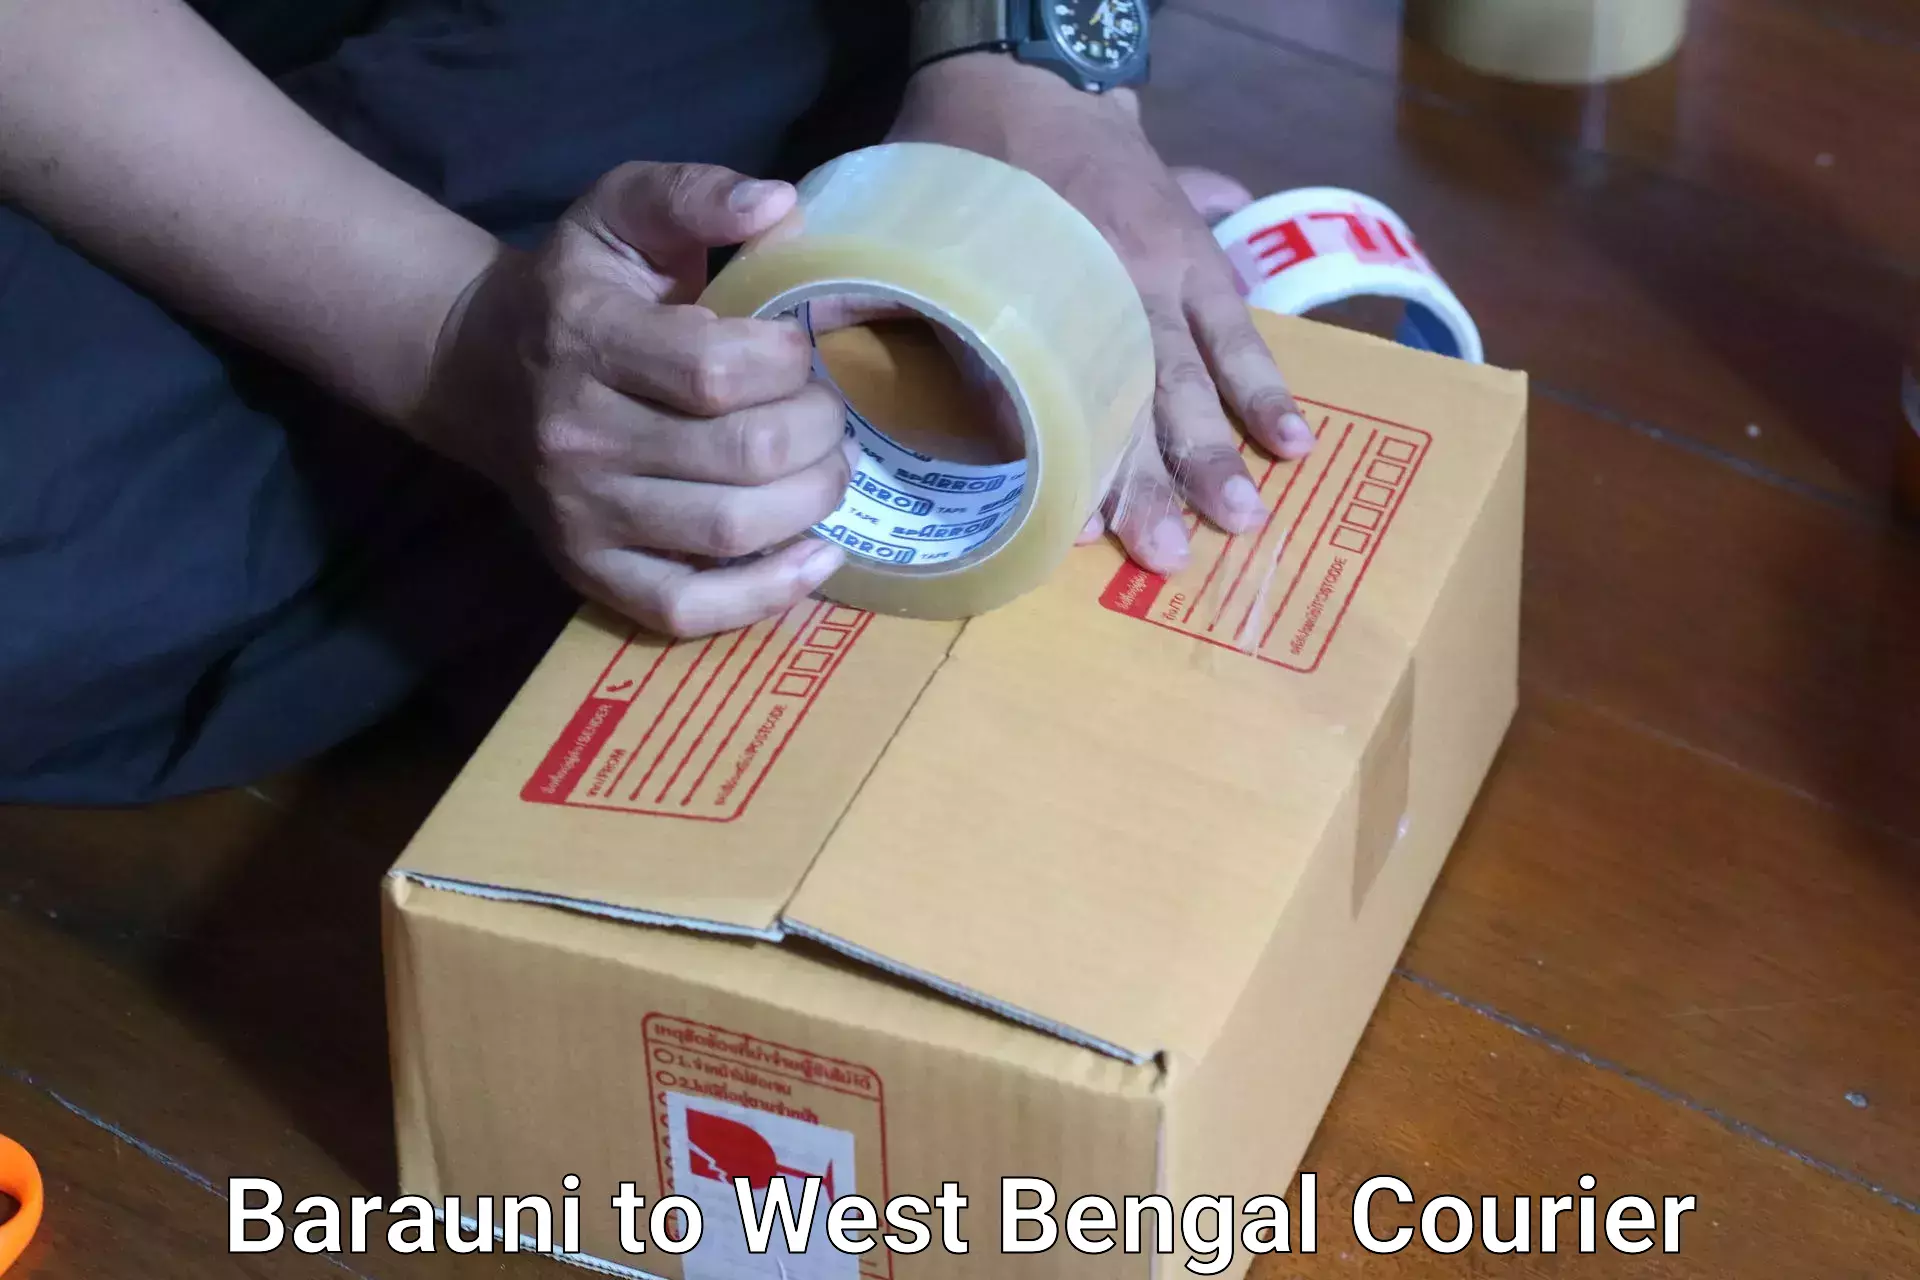 Baggage transport professionals Barauni to West Bengal